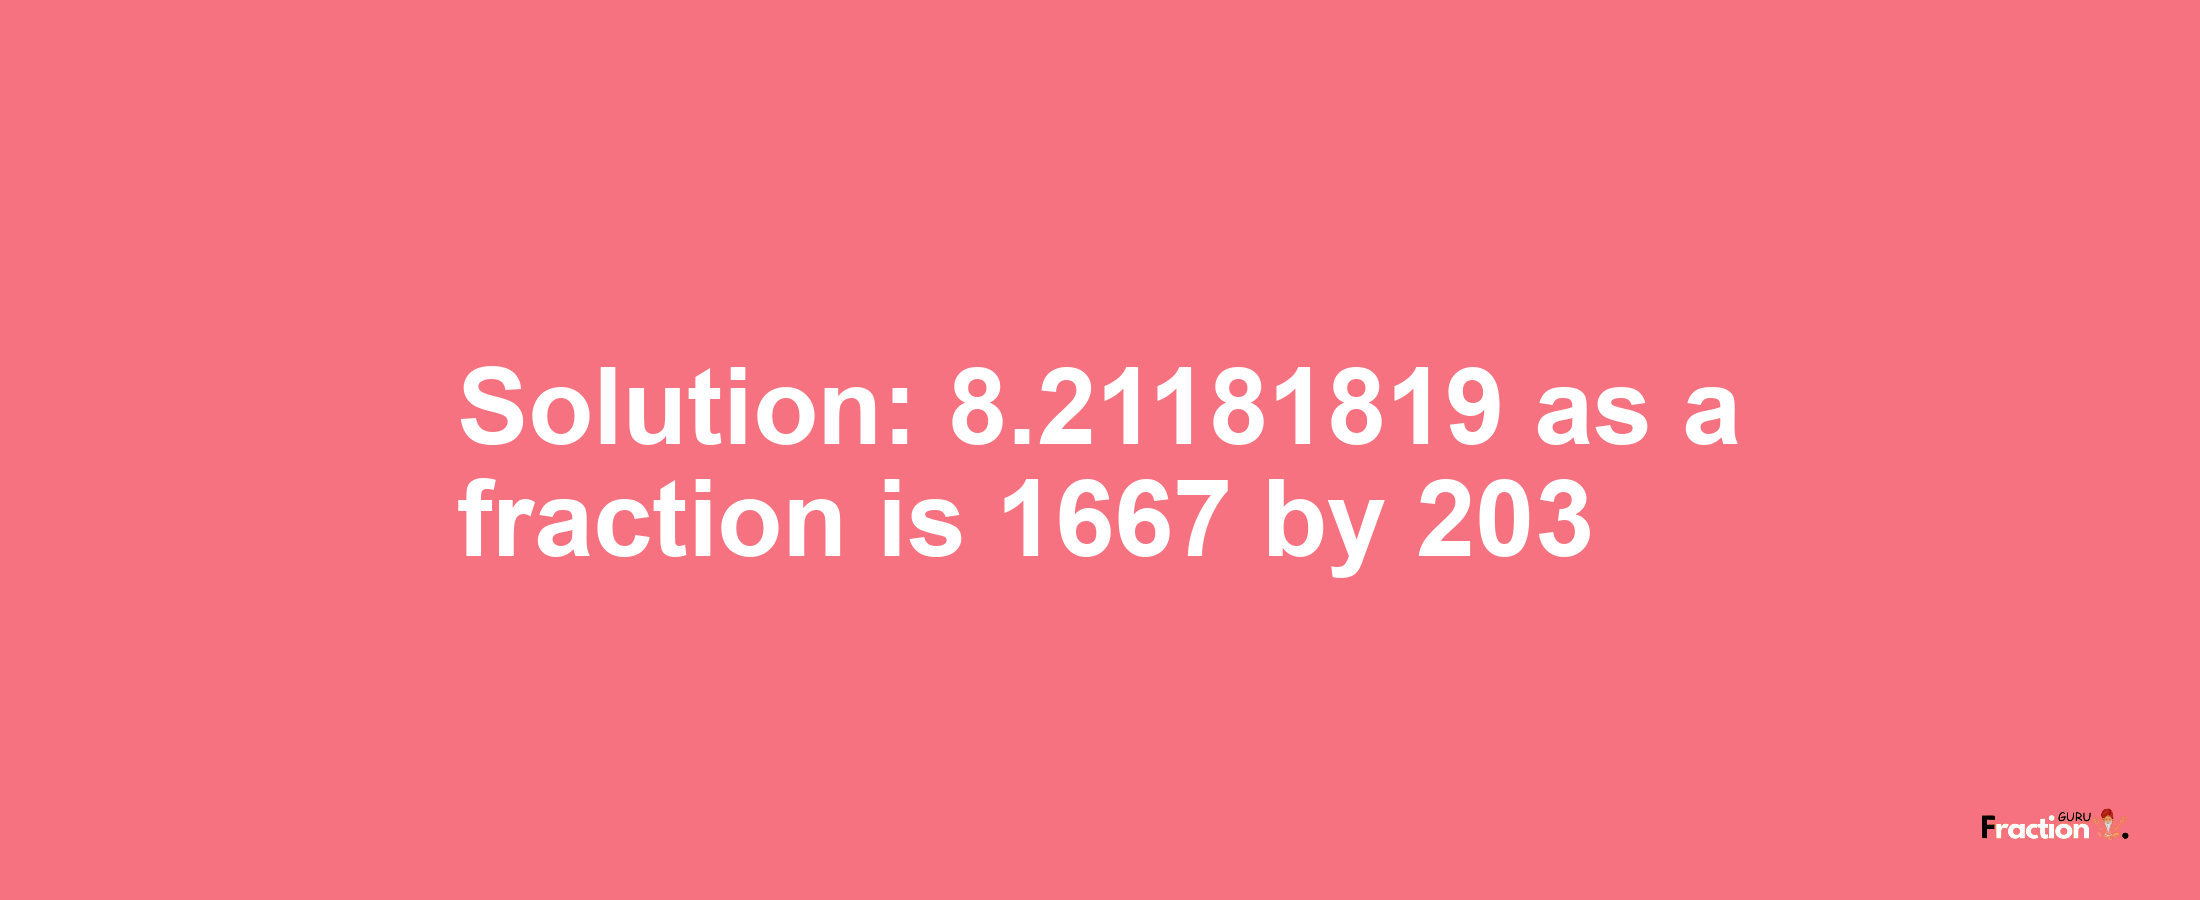 Solution:8.21181819 as a fraction is 1667/203